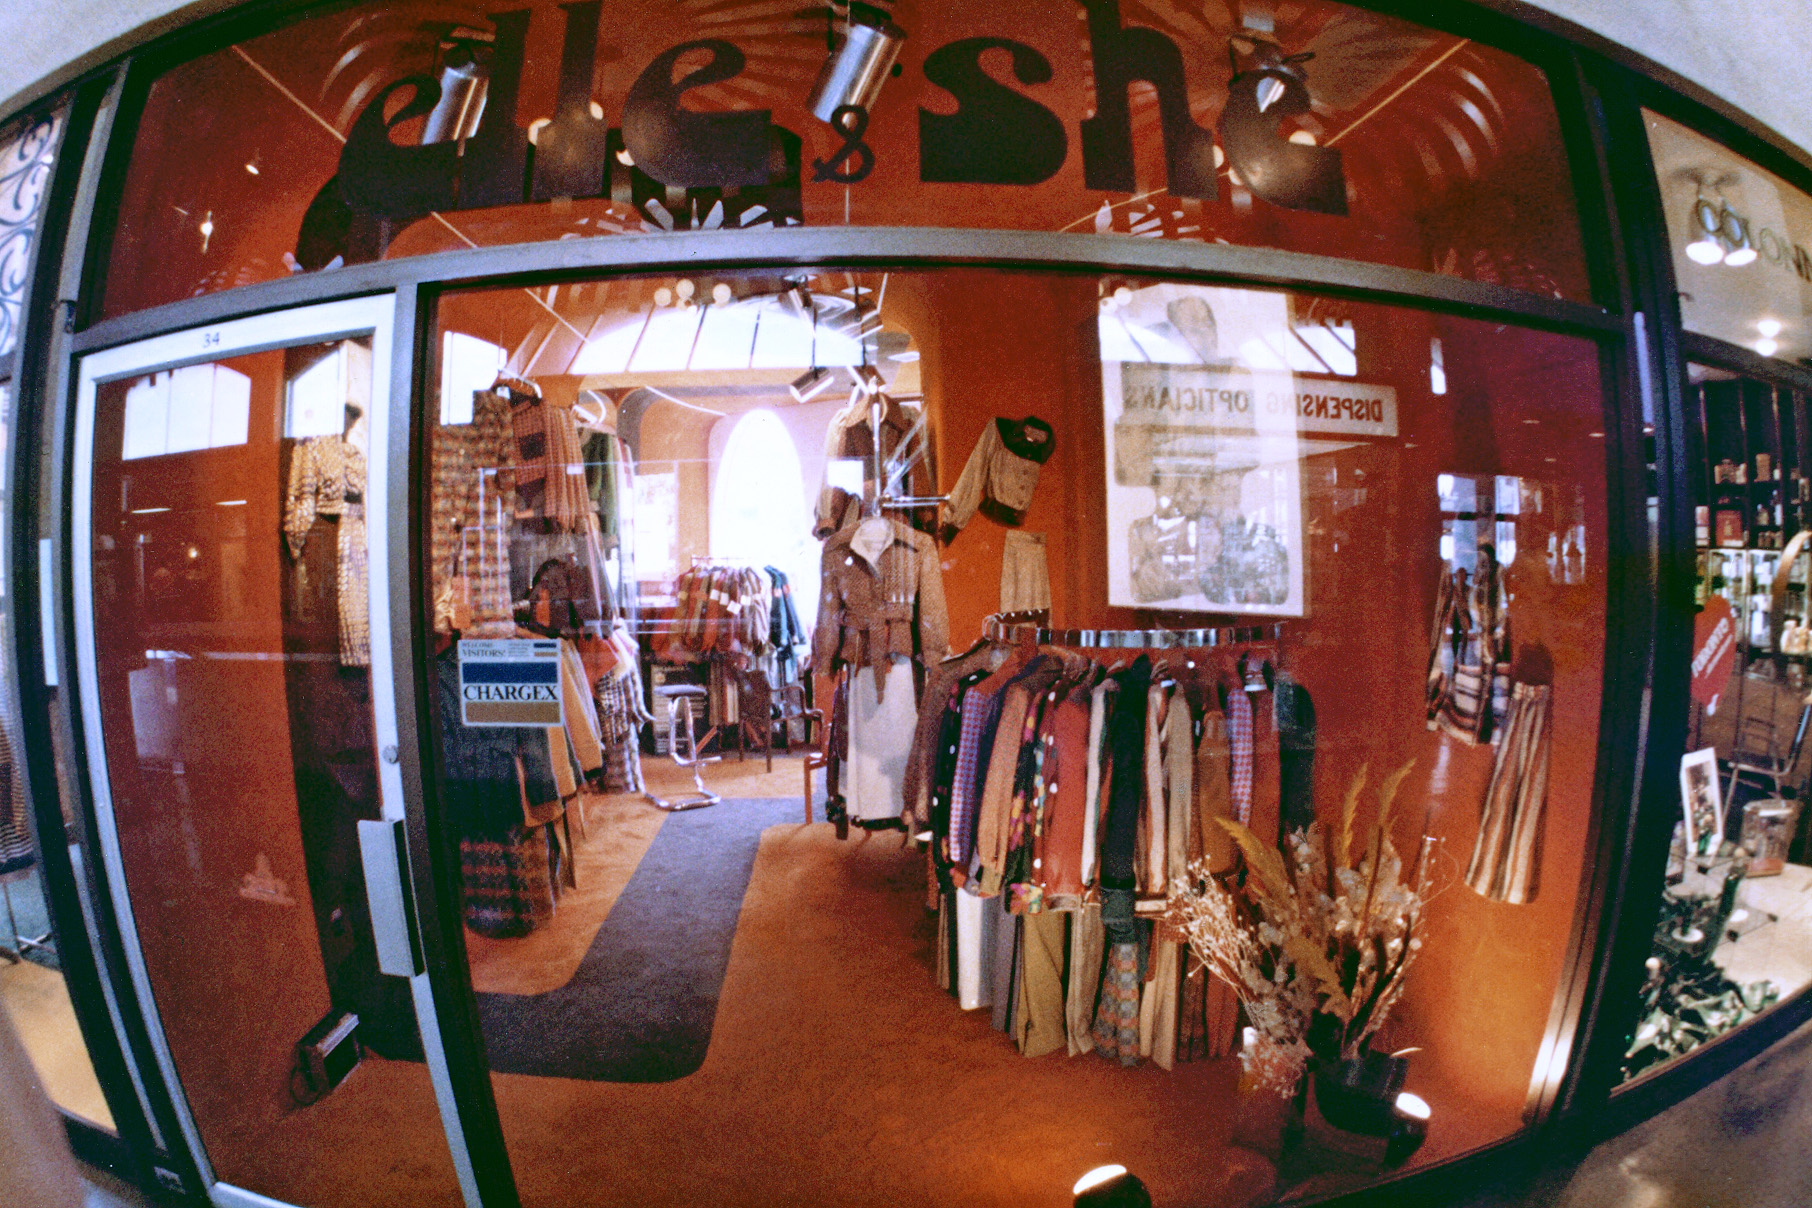 My parents' women's fashion clothes shop in Toronto, Ontario, September 1972. View full size.